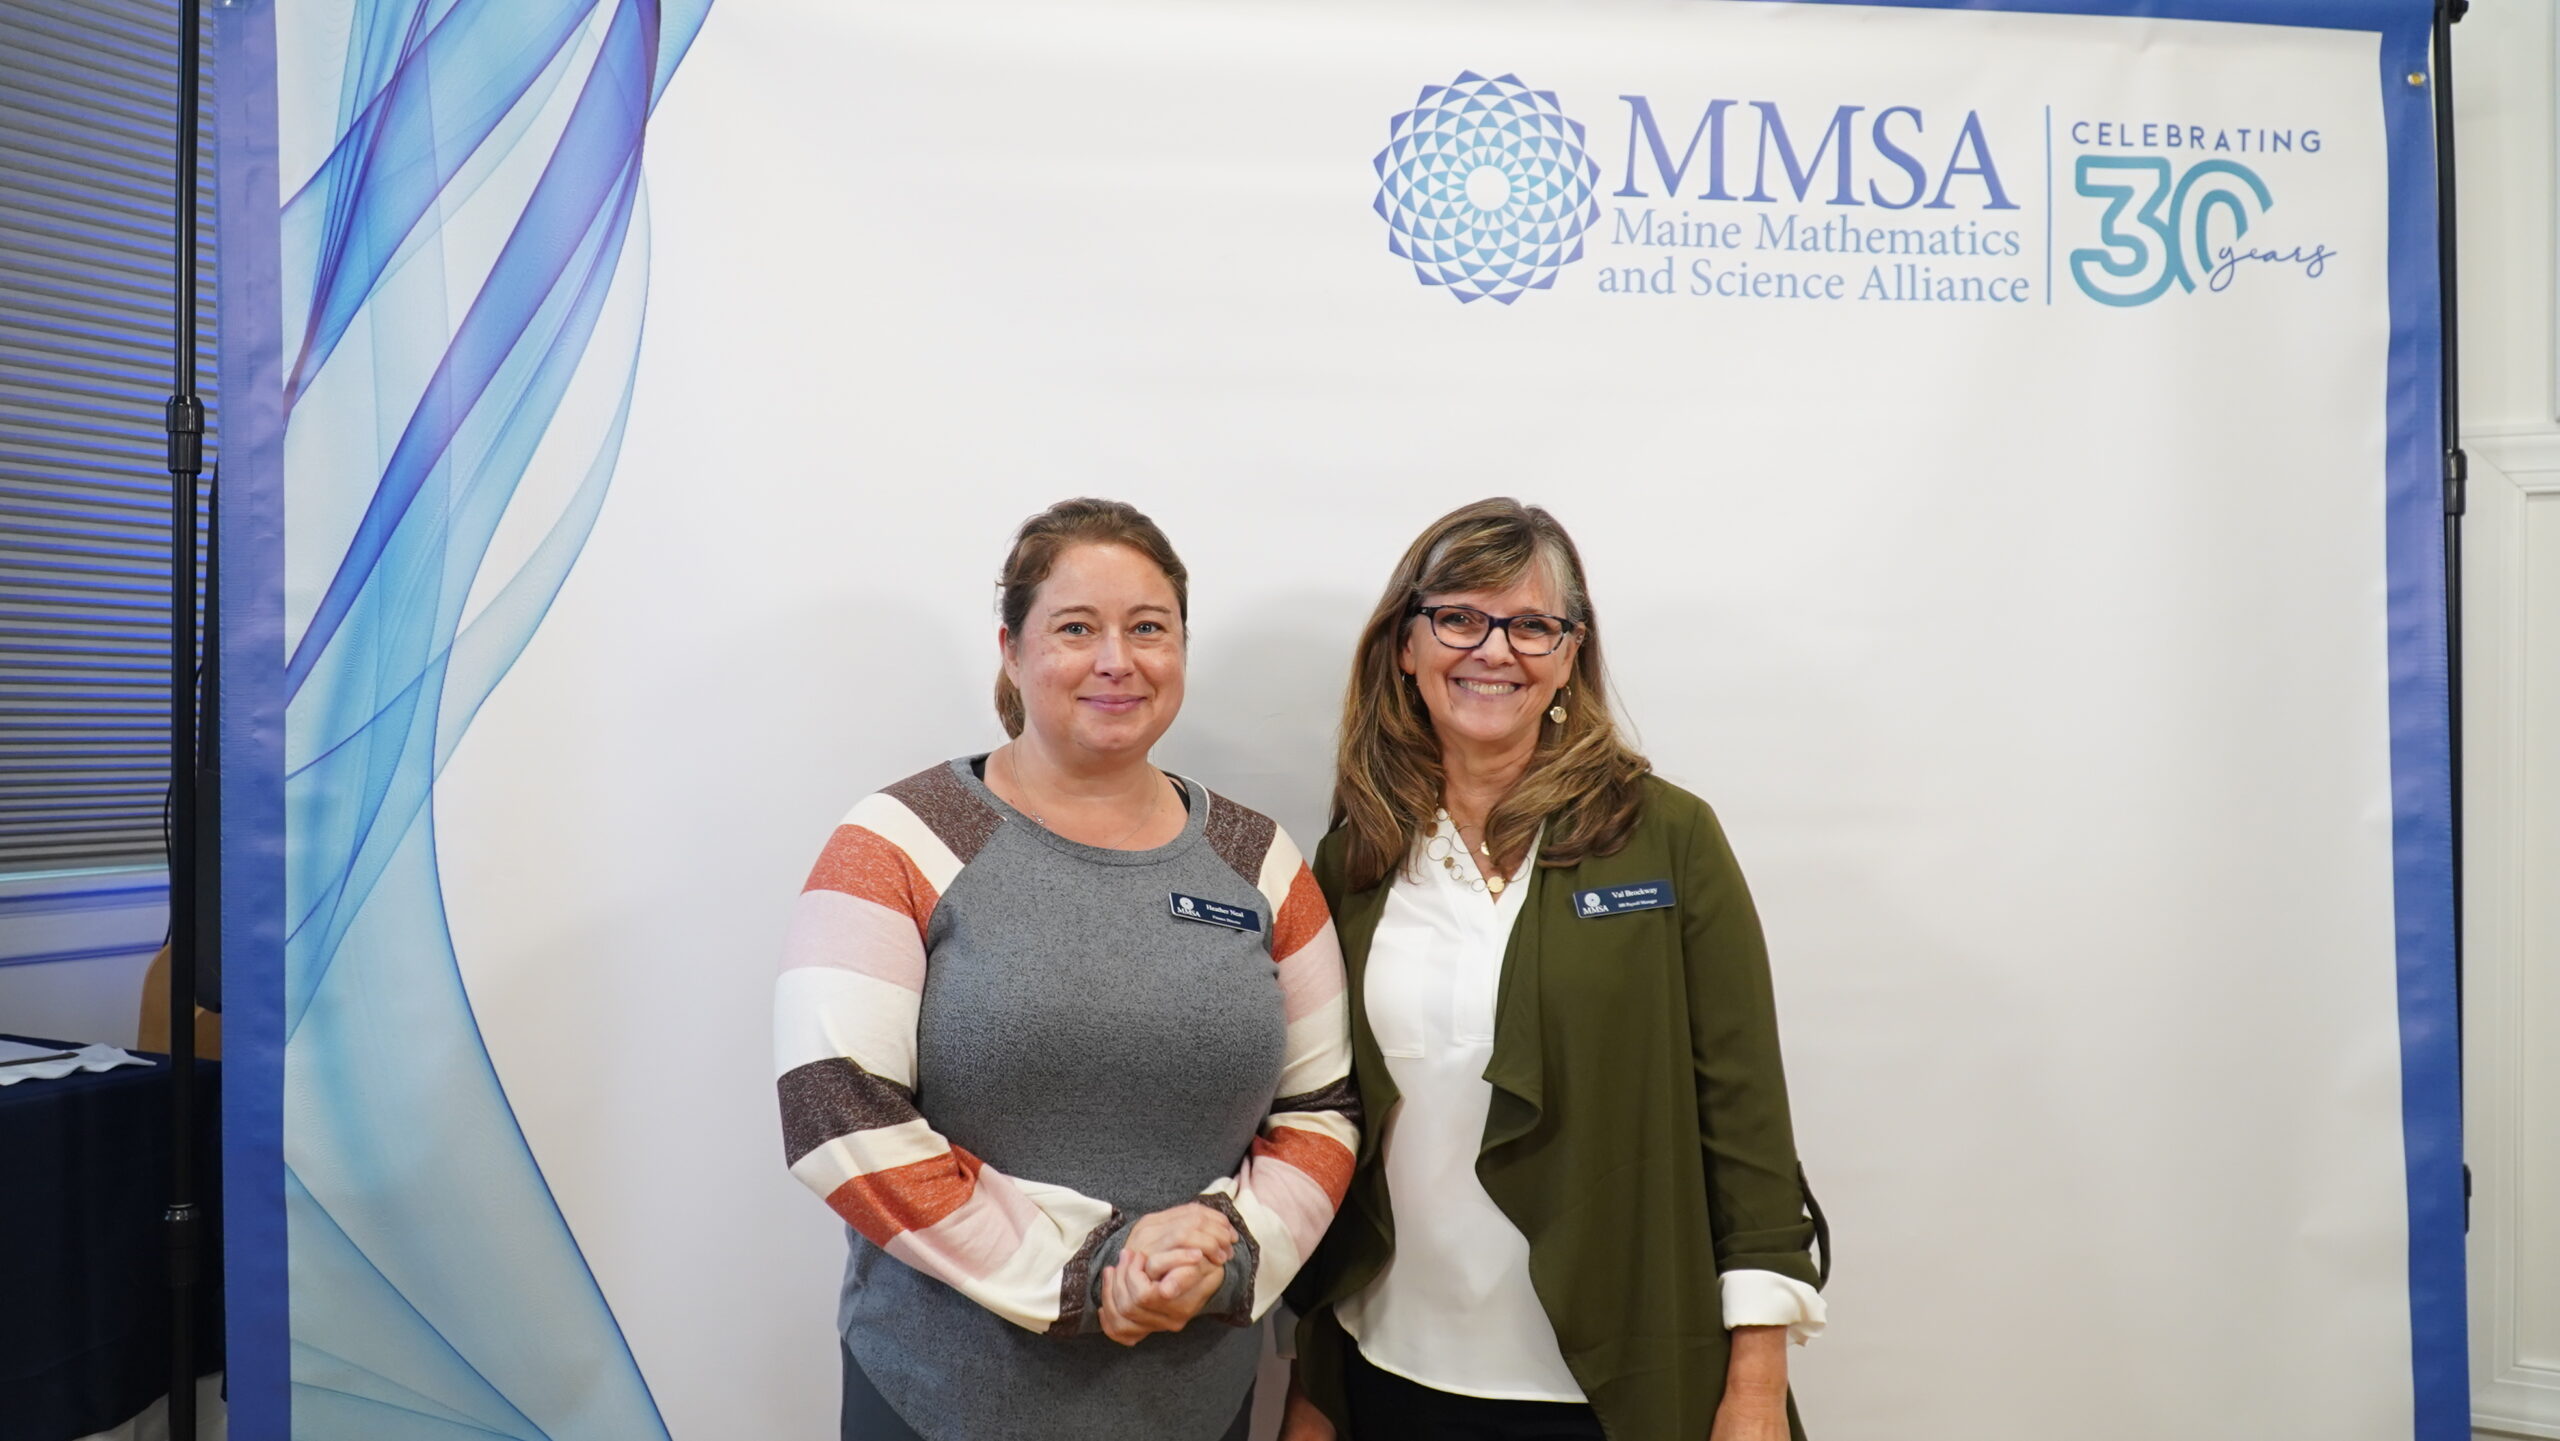 Two MMSA staff members pose in front of a photo banner.